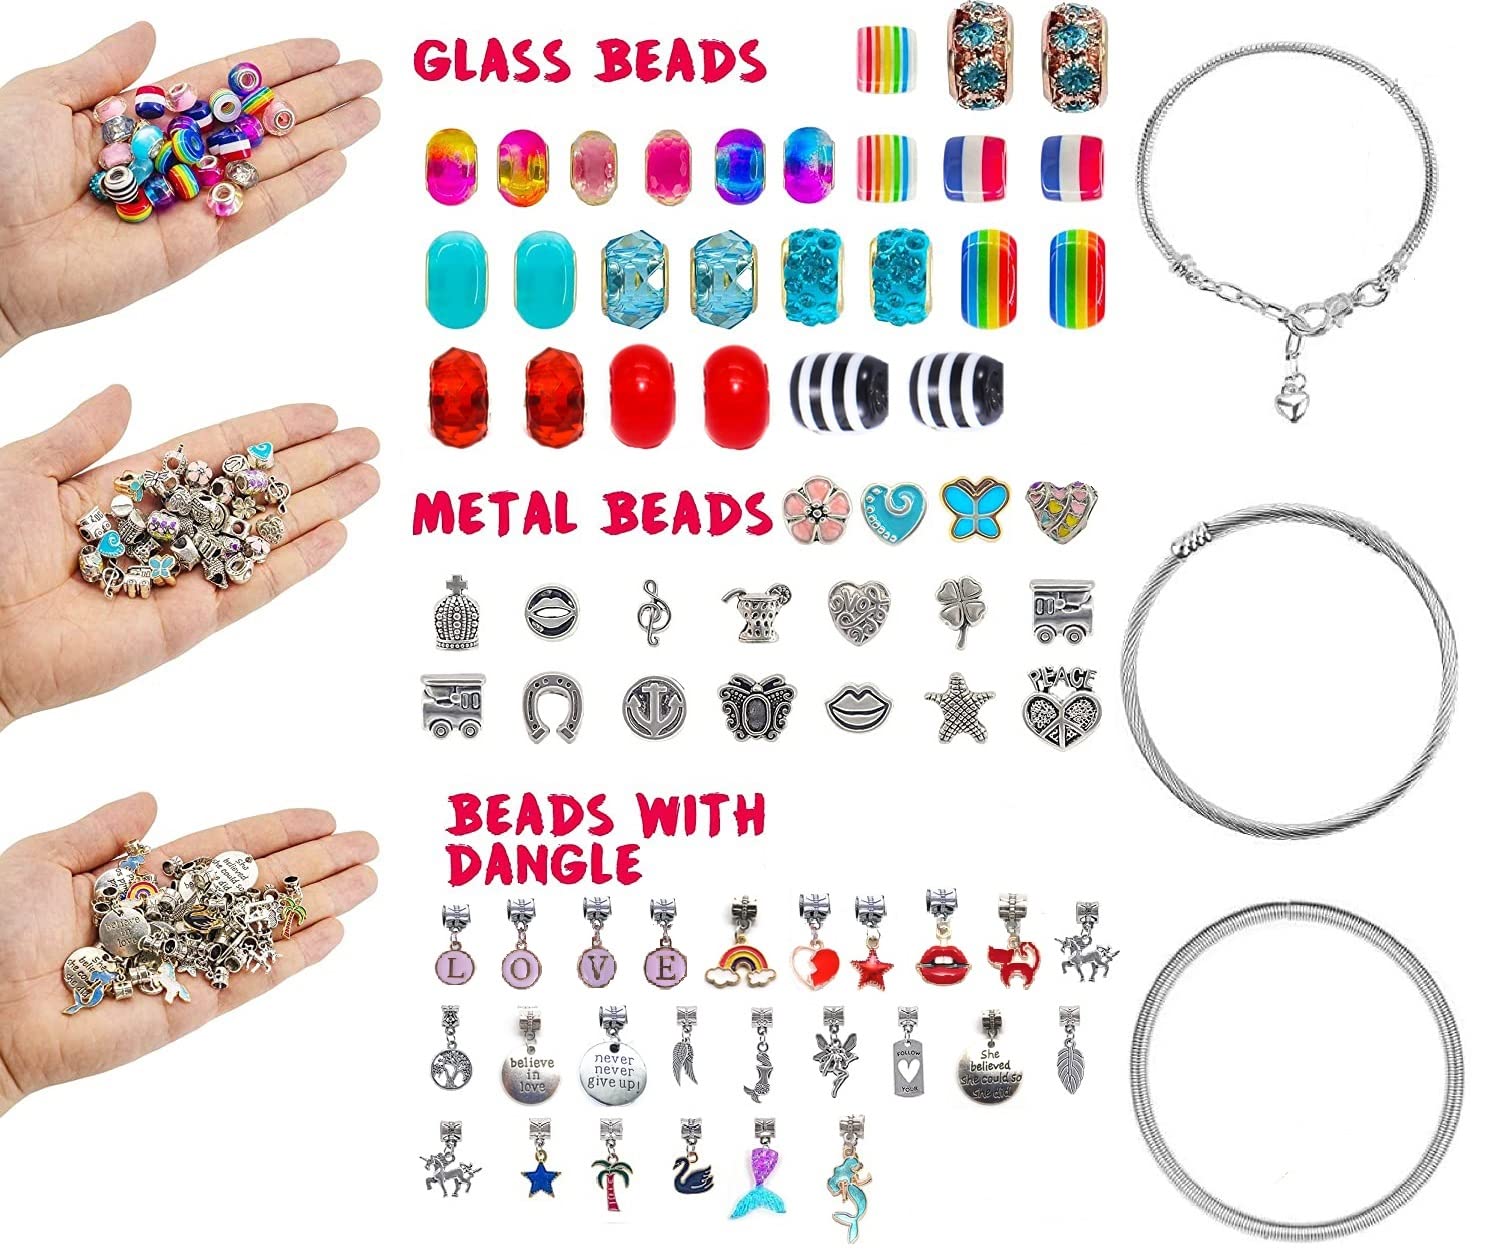 Bracelet Making Craft Kit for Girls,Jewelry Making Supplies Beads Charms Bracelets for DIY Craft Gifts Toys for Teen Girls Age 4 5 6 7 8 9 10 12